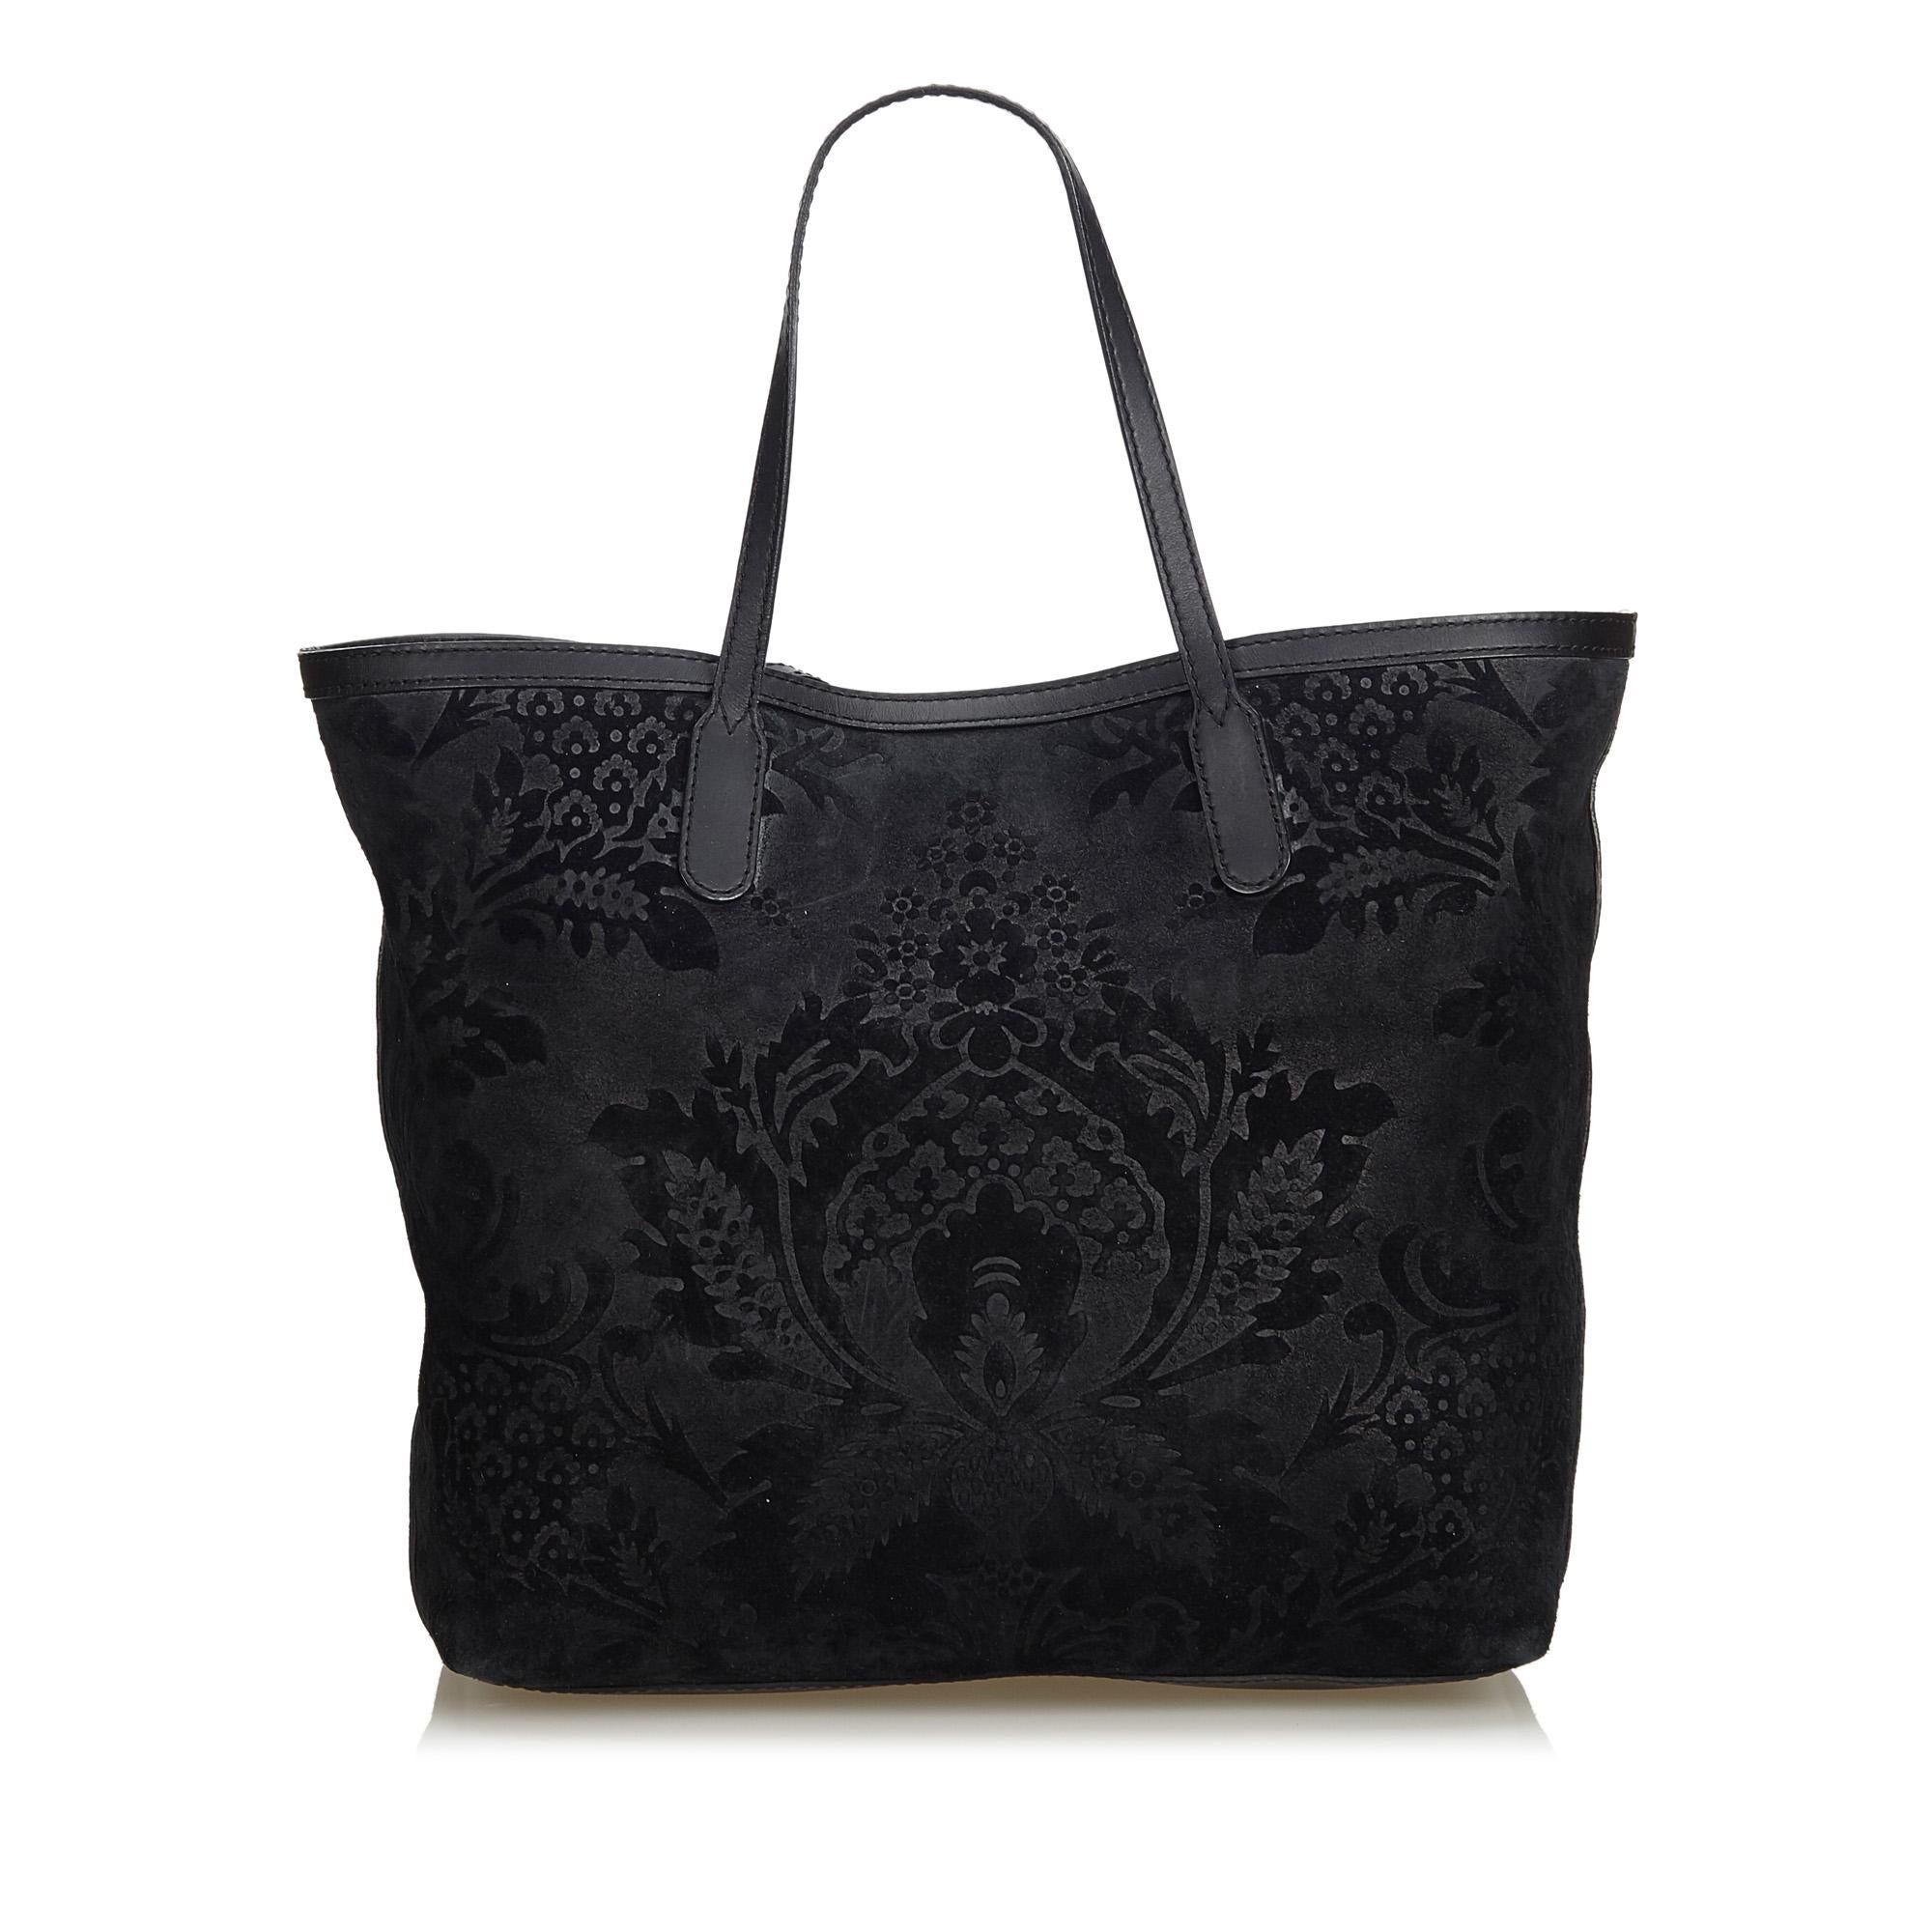 Vintage Authentic Gucci Black Brocade Stirrup Tote Bag Italy w Dust Bag LARGE  In Good Condition For Sale In Orlando, FL